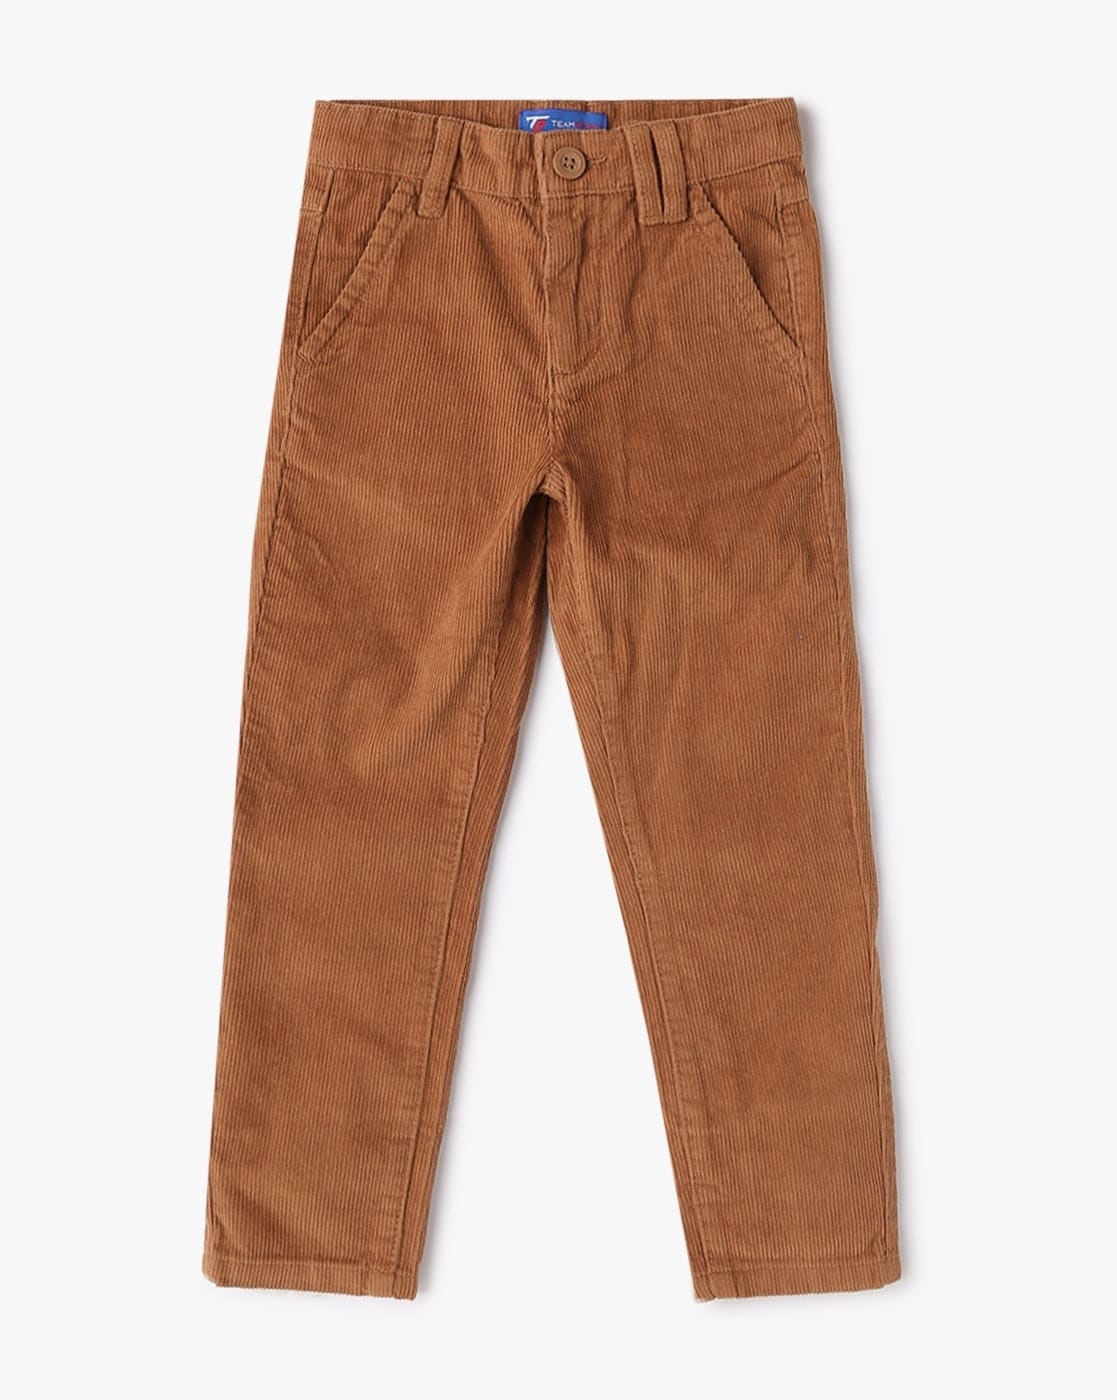 Buy The Children's Place Boys Boys Brown Skinny Corduroy Trousers -  NNNOW.com